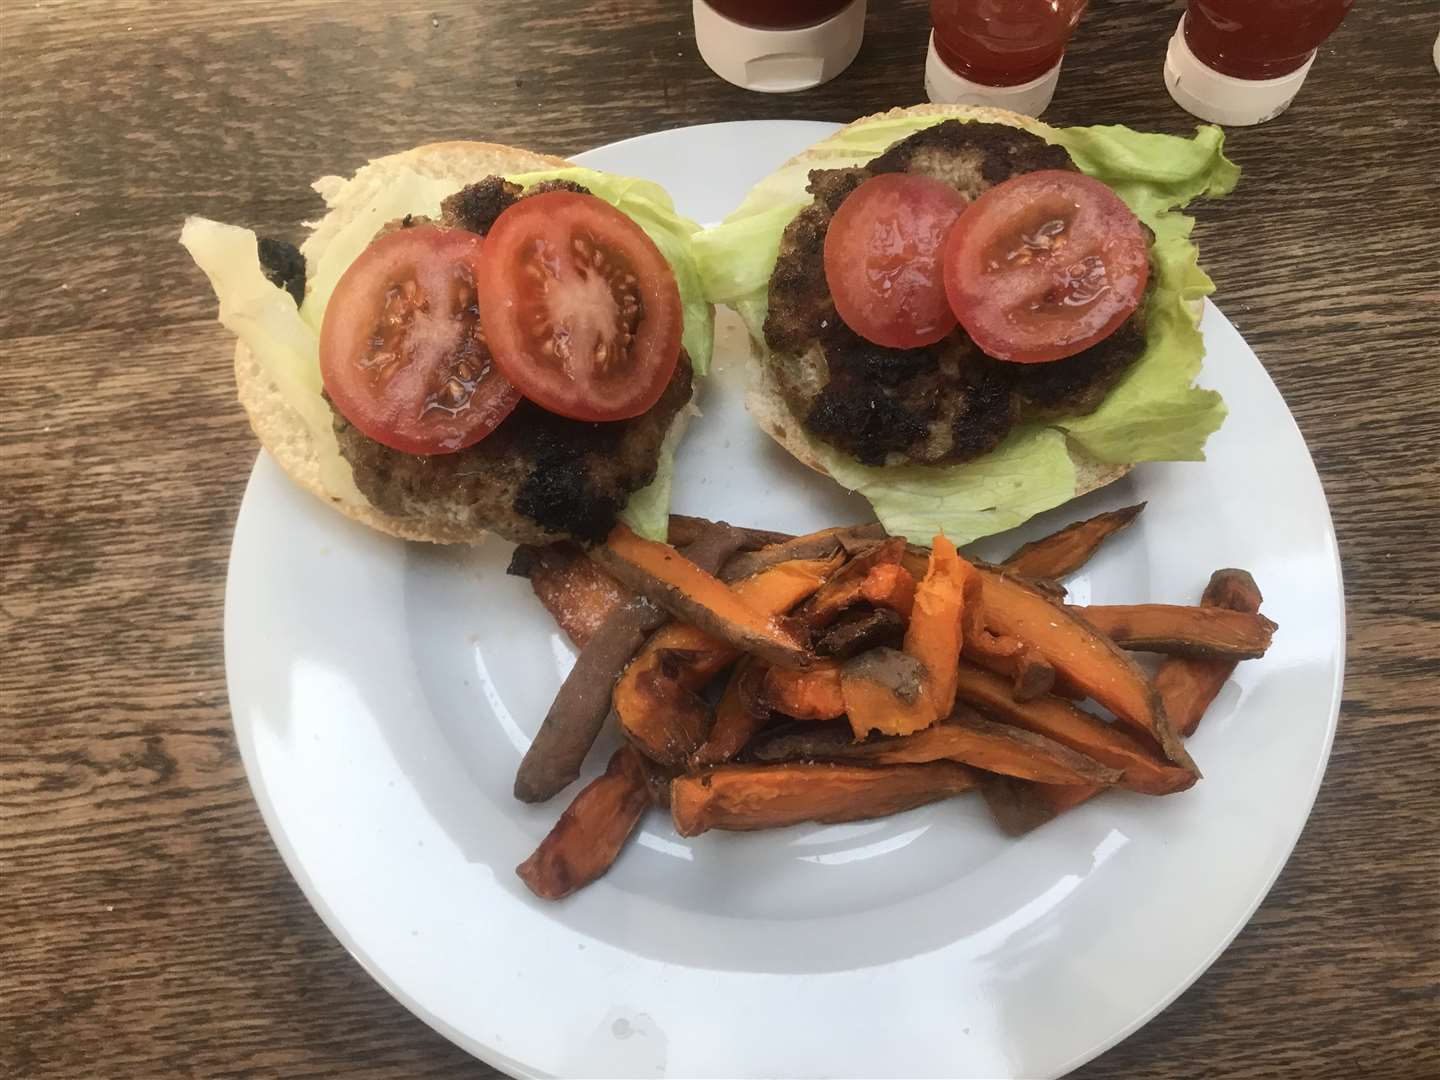 Our turkey burgers were made from scratch